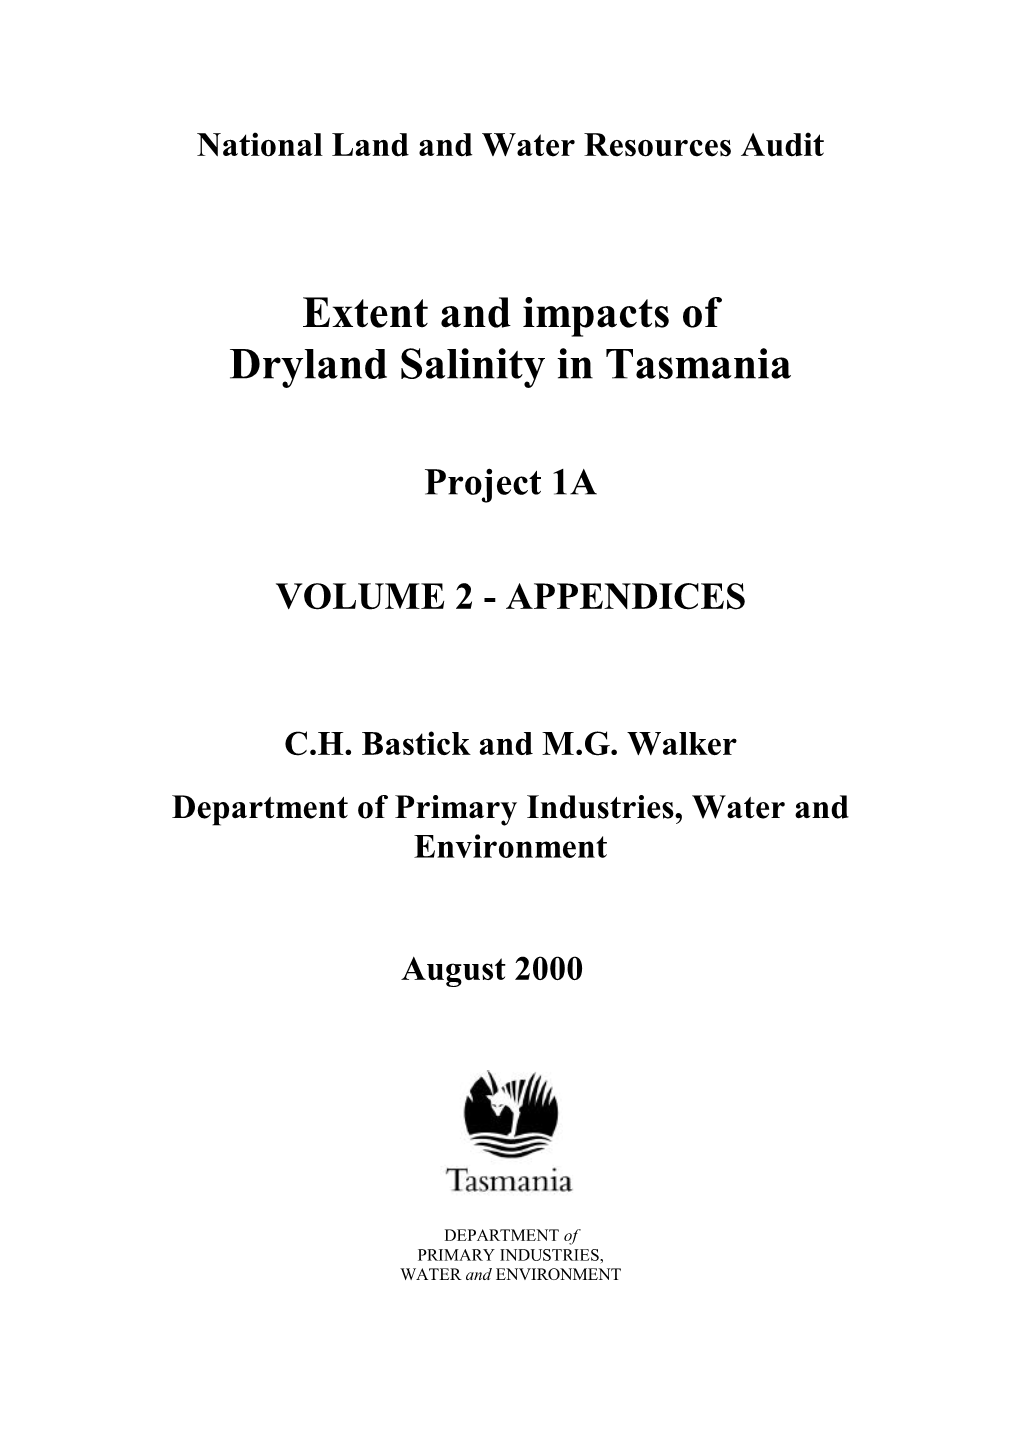 Extent and Impacts of Dryland Salinity in Tasmania